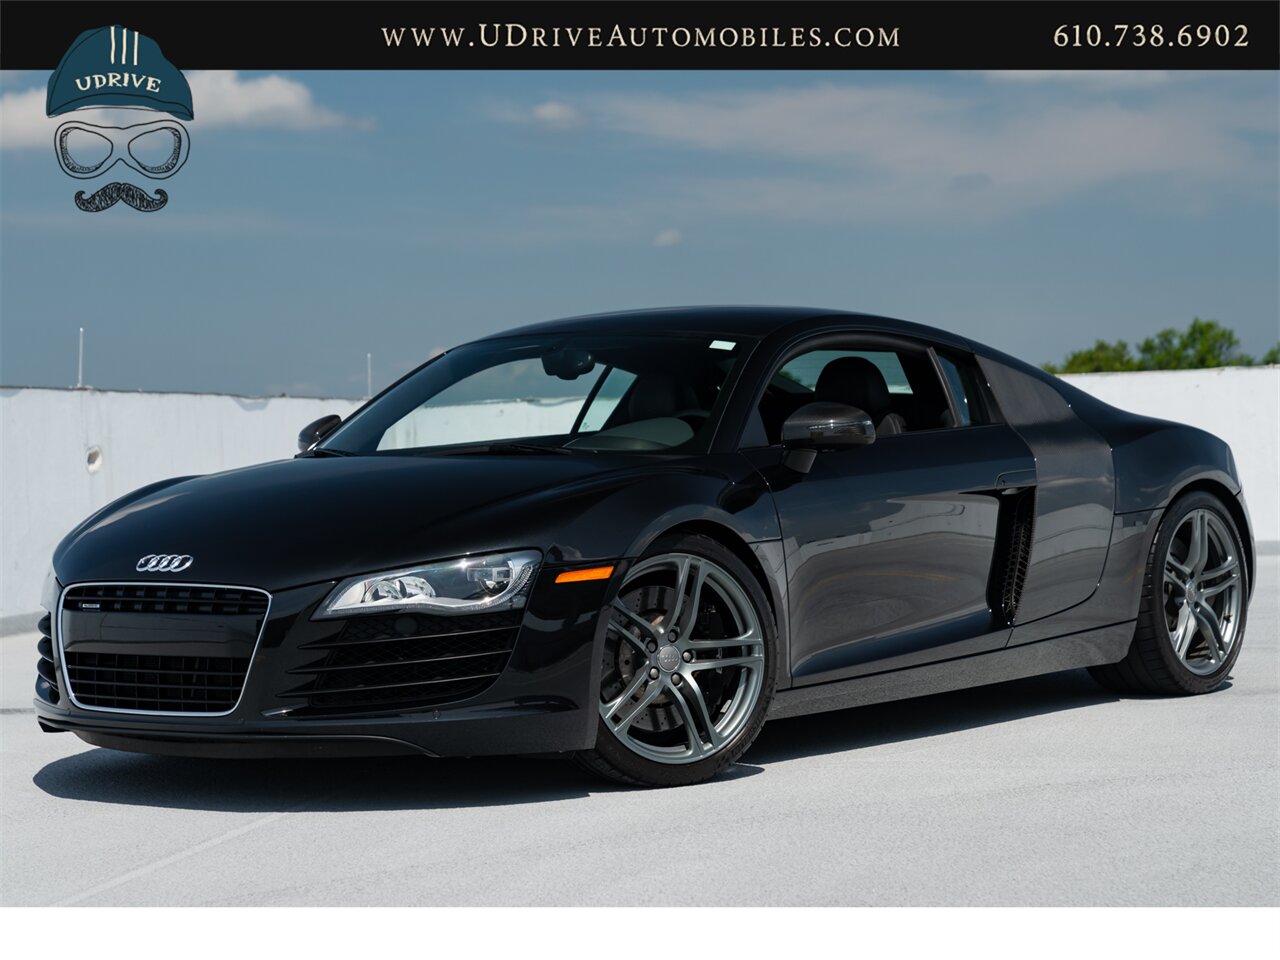 2012 Audi R8 4.2 Quattro  6 Speed Manual 1 Owner Service History - Photo 1 - West Chester, PA 19382